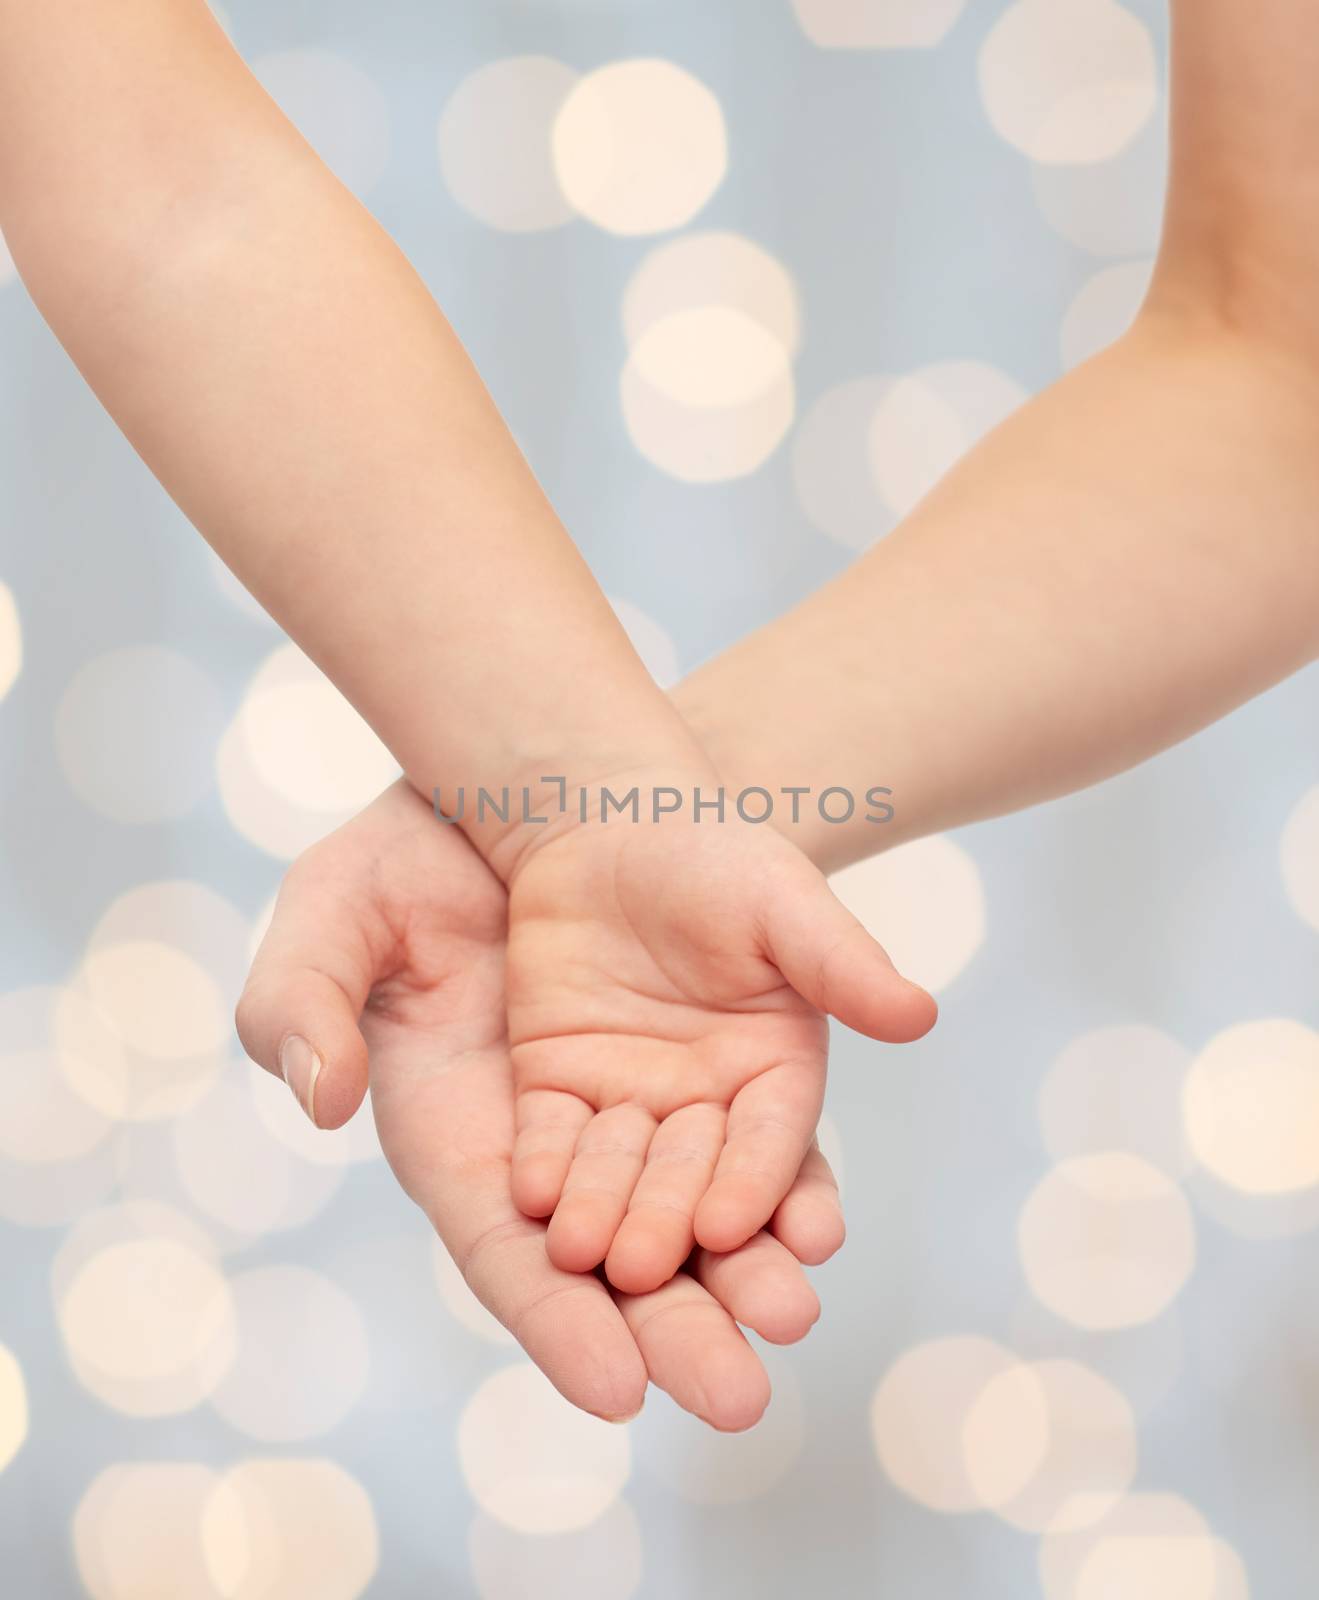 people, charity, family, children and advertisement concept - close up of woman and little child hands holding empty palms over holiday lights background